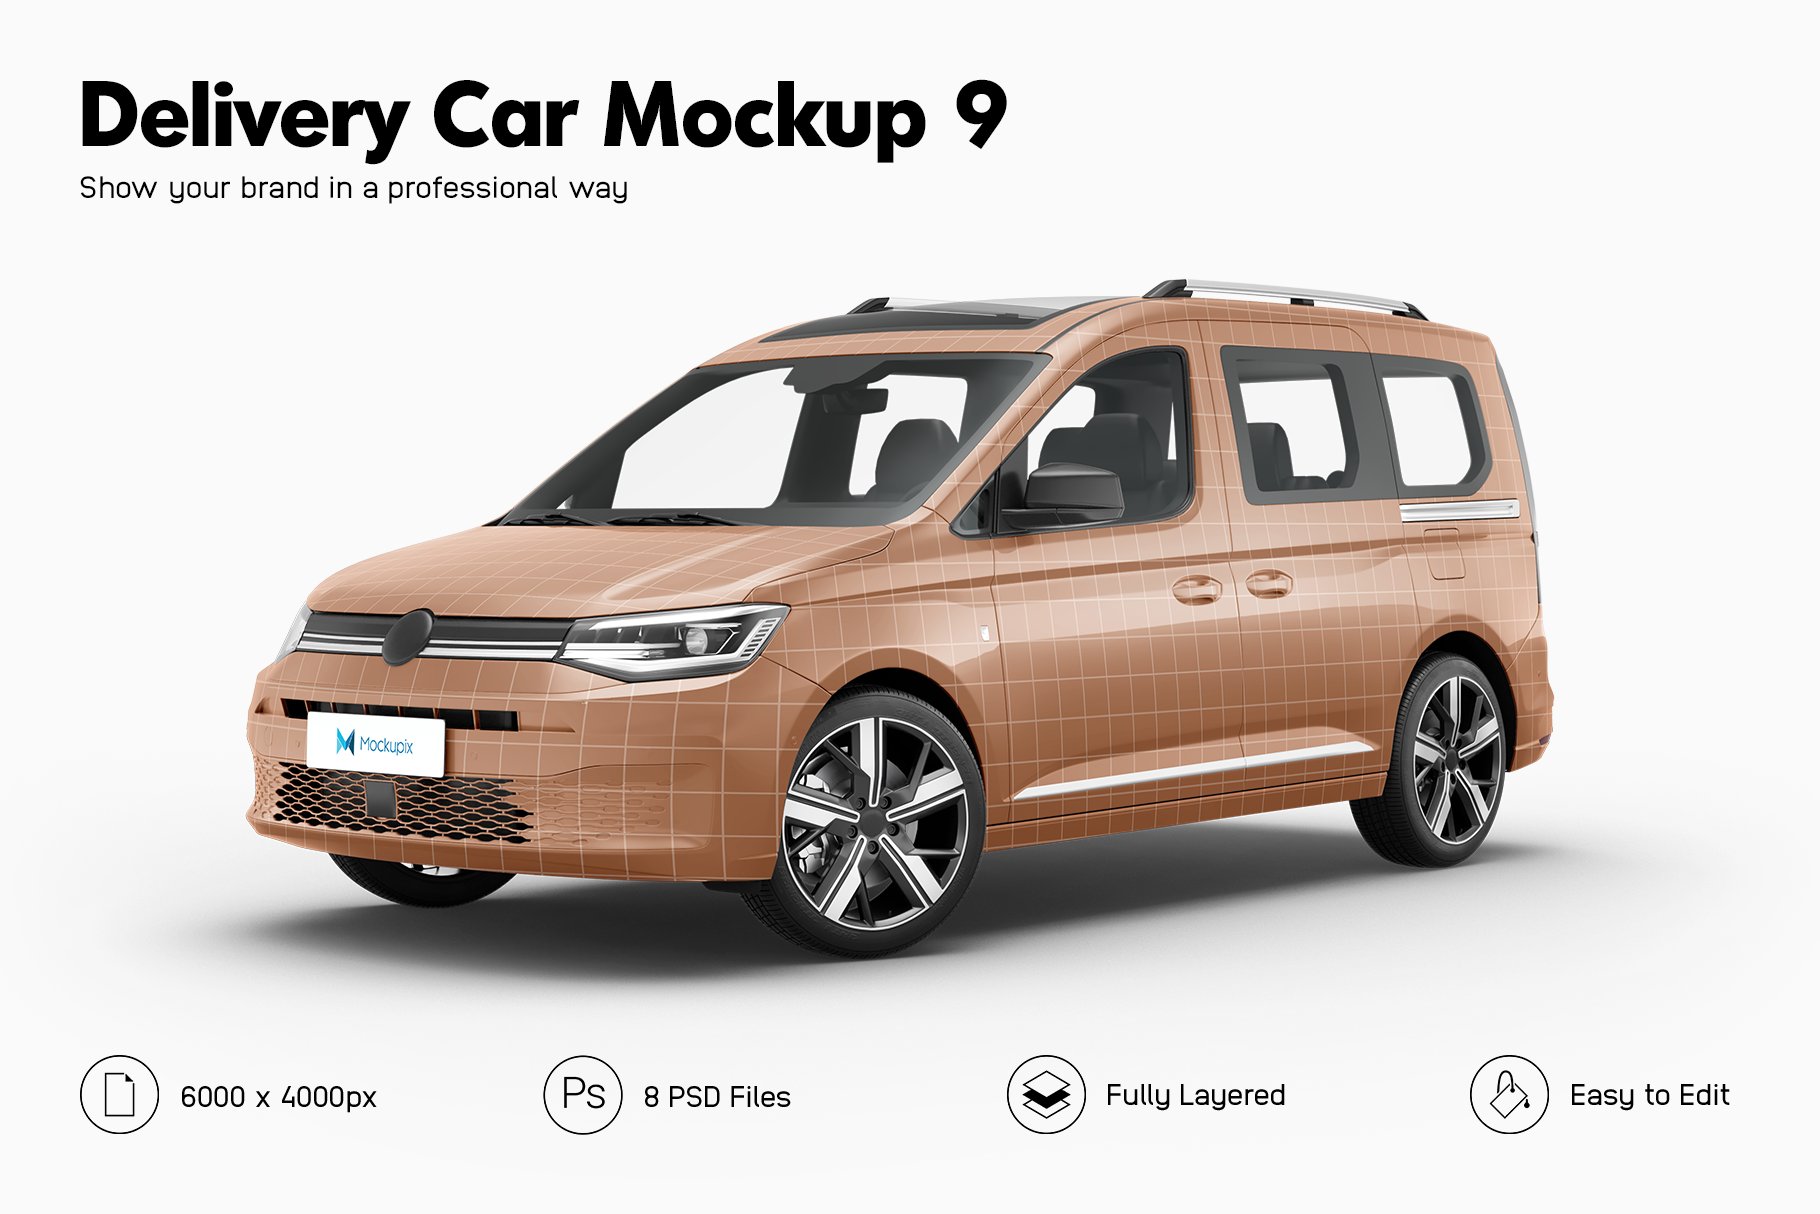 Delivery Car Mockup 9 cover image.